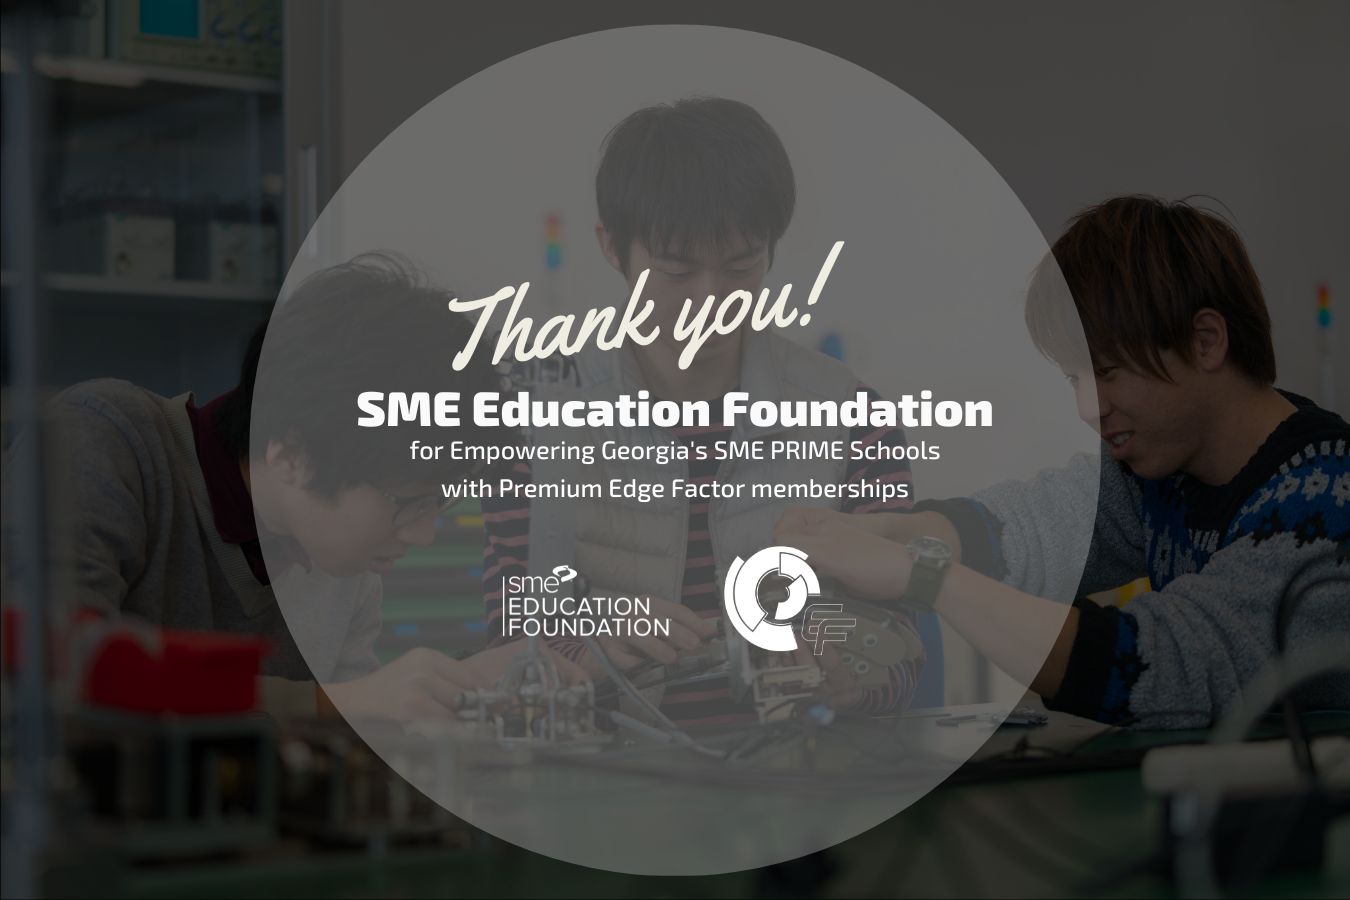 SME Education Foundation equips 12 SME PRIME School in Georgia with Edge Factor Memberships